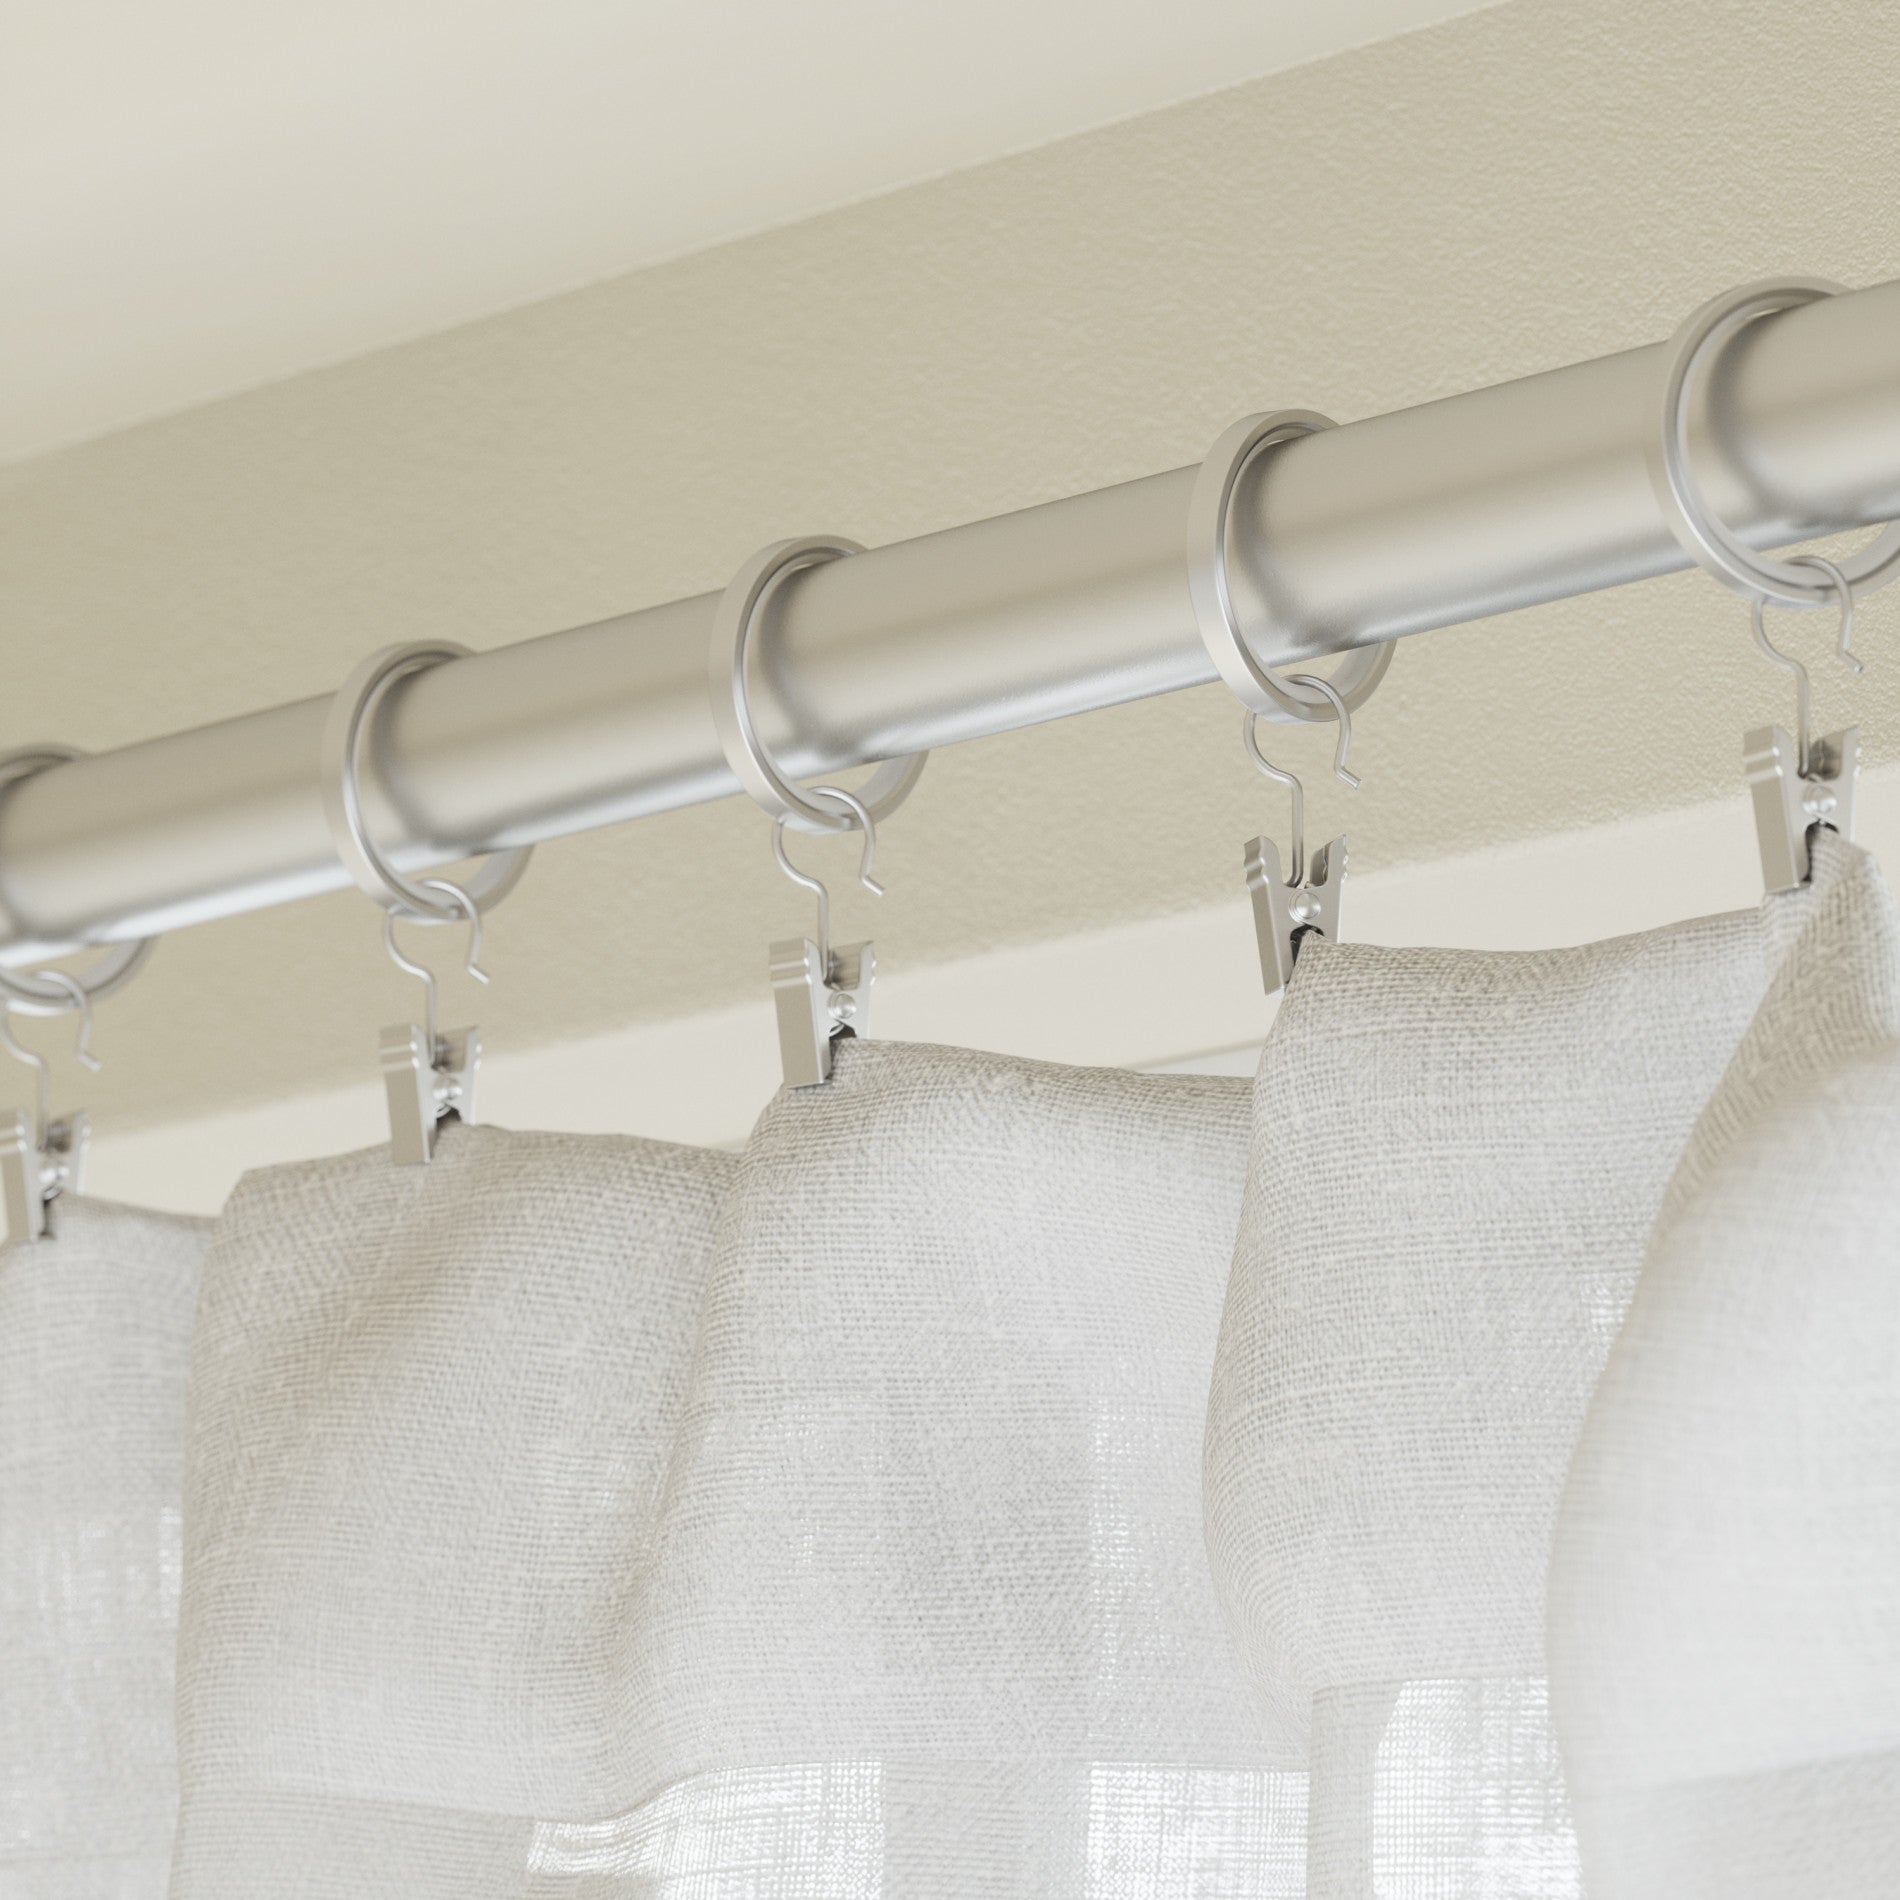 Don't Throw Out Old Shower Curtain Rings. Here's How To Repurpose Them  Instead